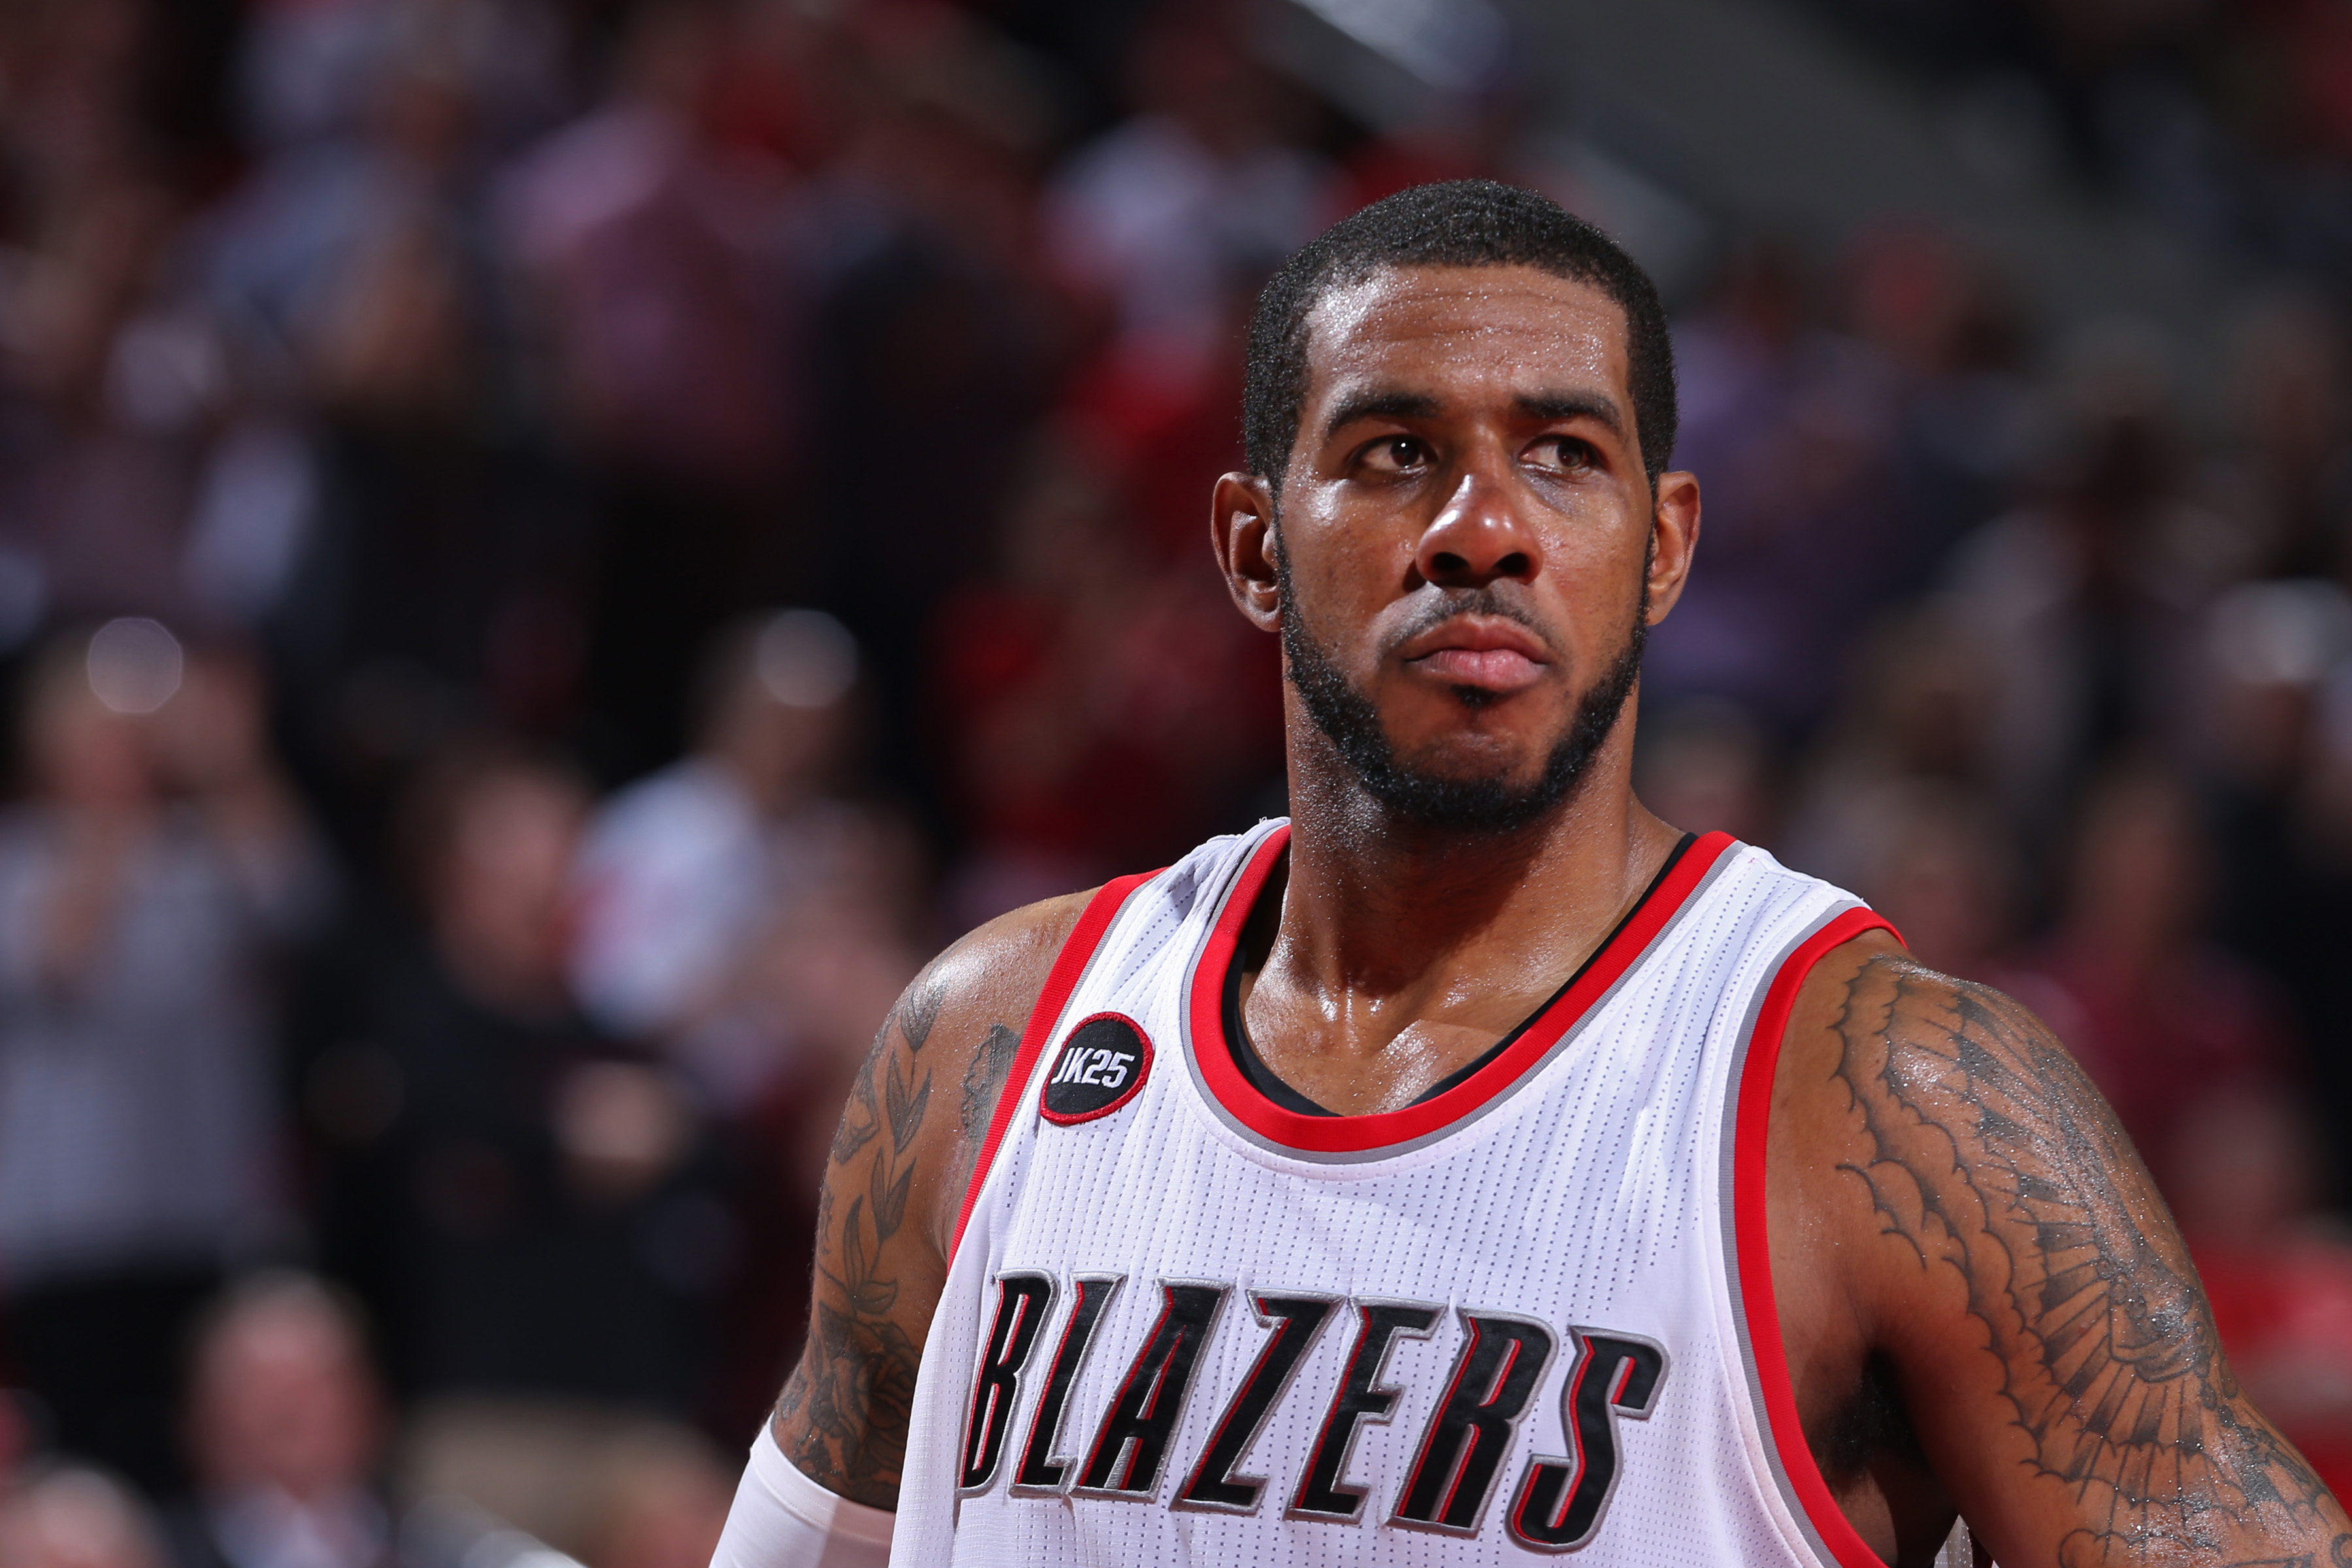 PORTLAND, OR - APRIL 27: A close up shot of LaMarcus Aldridge #12 of the Portland Trail Blazers against the Memphis Grizzlies in Game Four of the Western Conference Quarterfinals during the 2015 NBA Playoffs on April 27, 2015 at the Moda Center in Portland, Oregon. (Photo by Sam Forencich/NBAE via Getty Images)